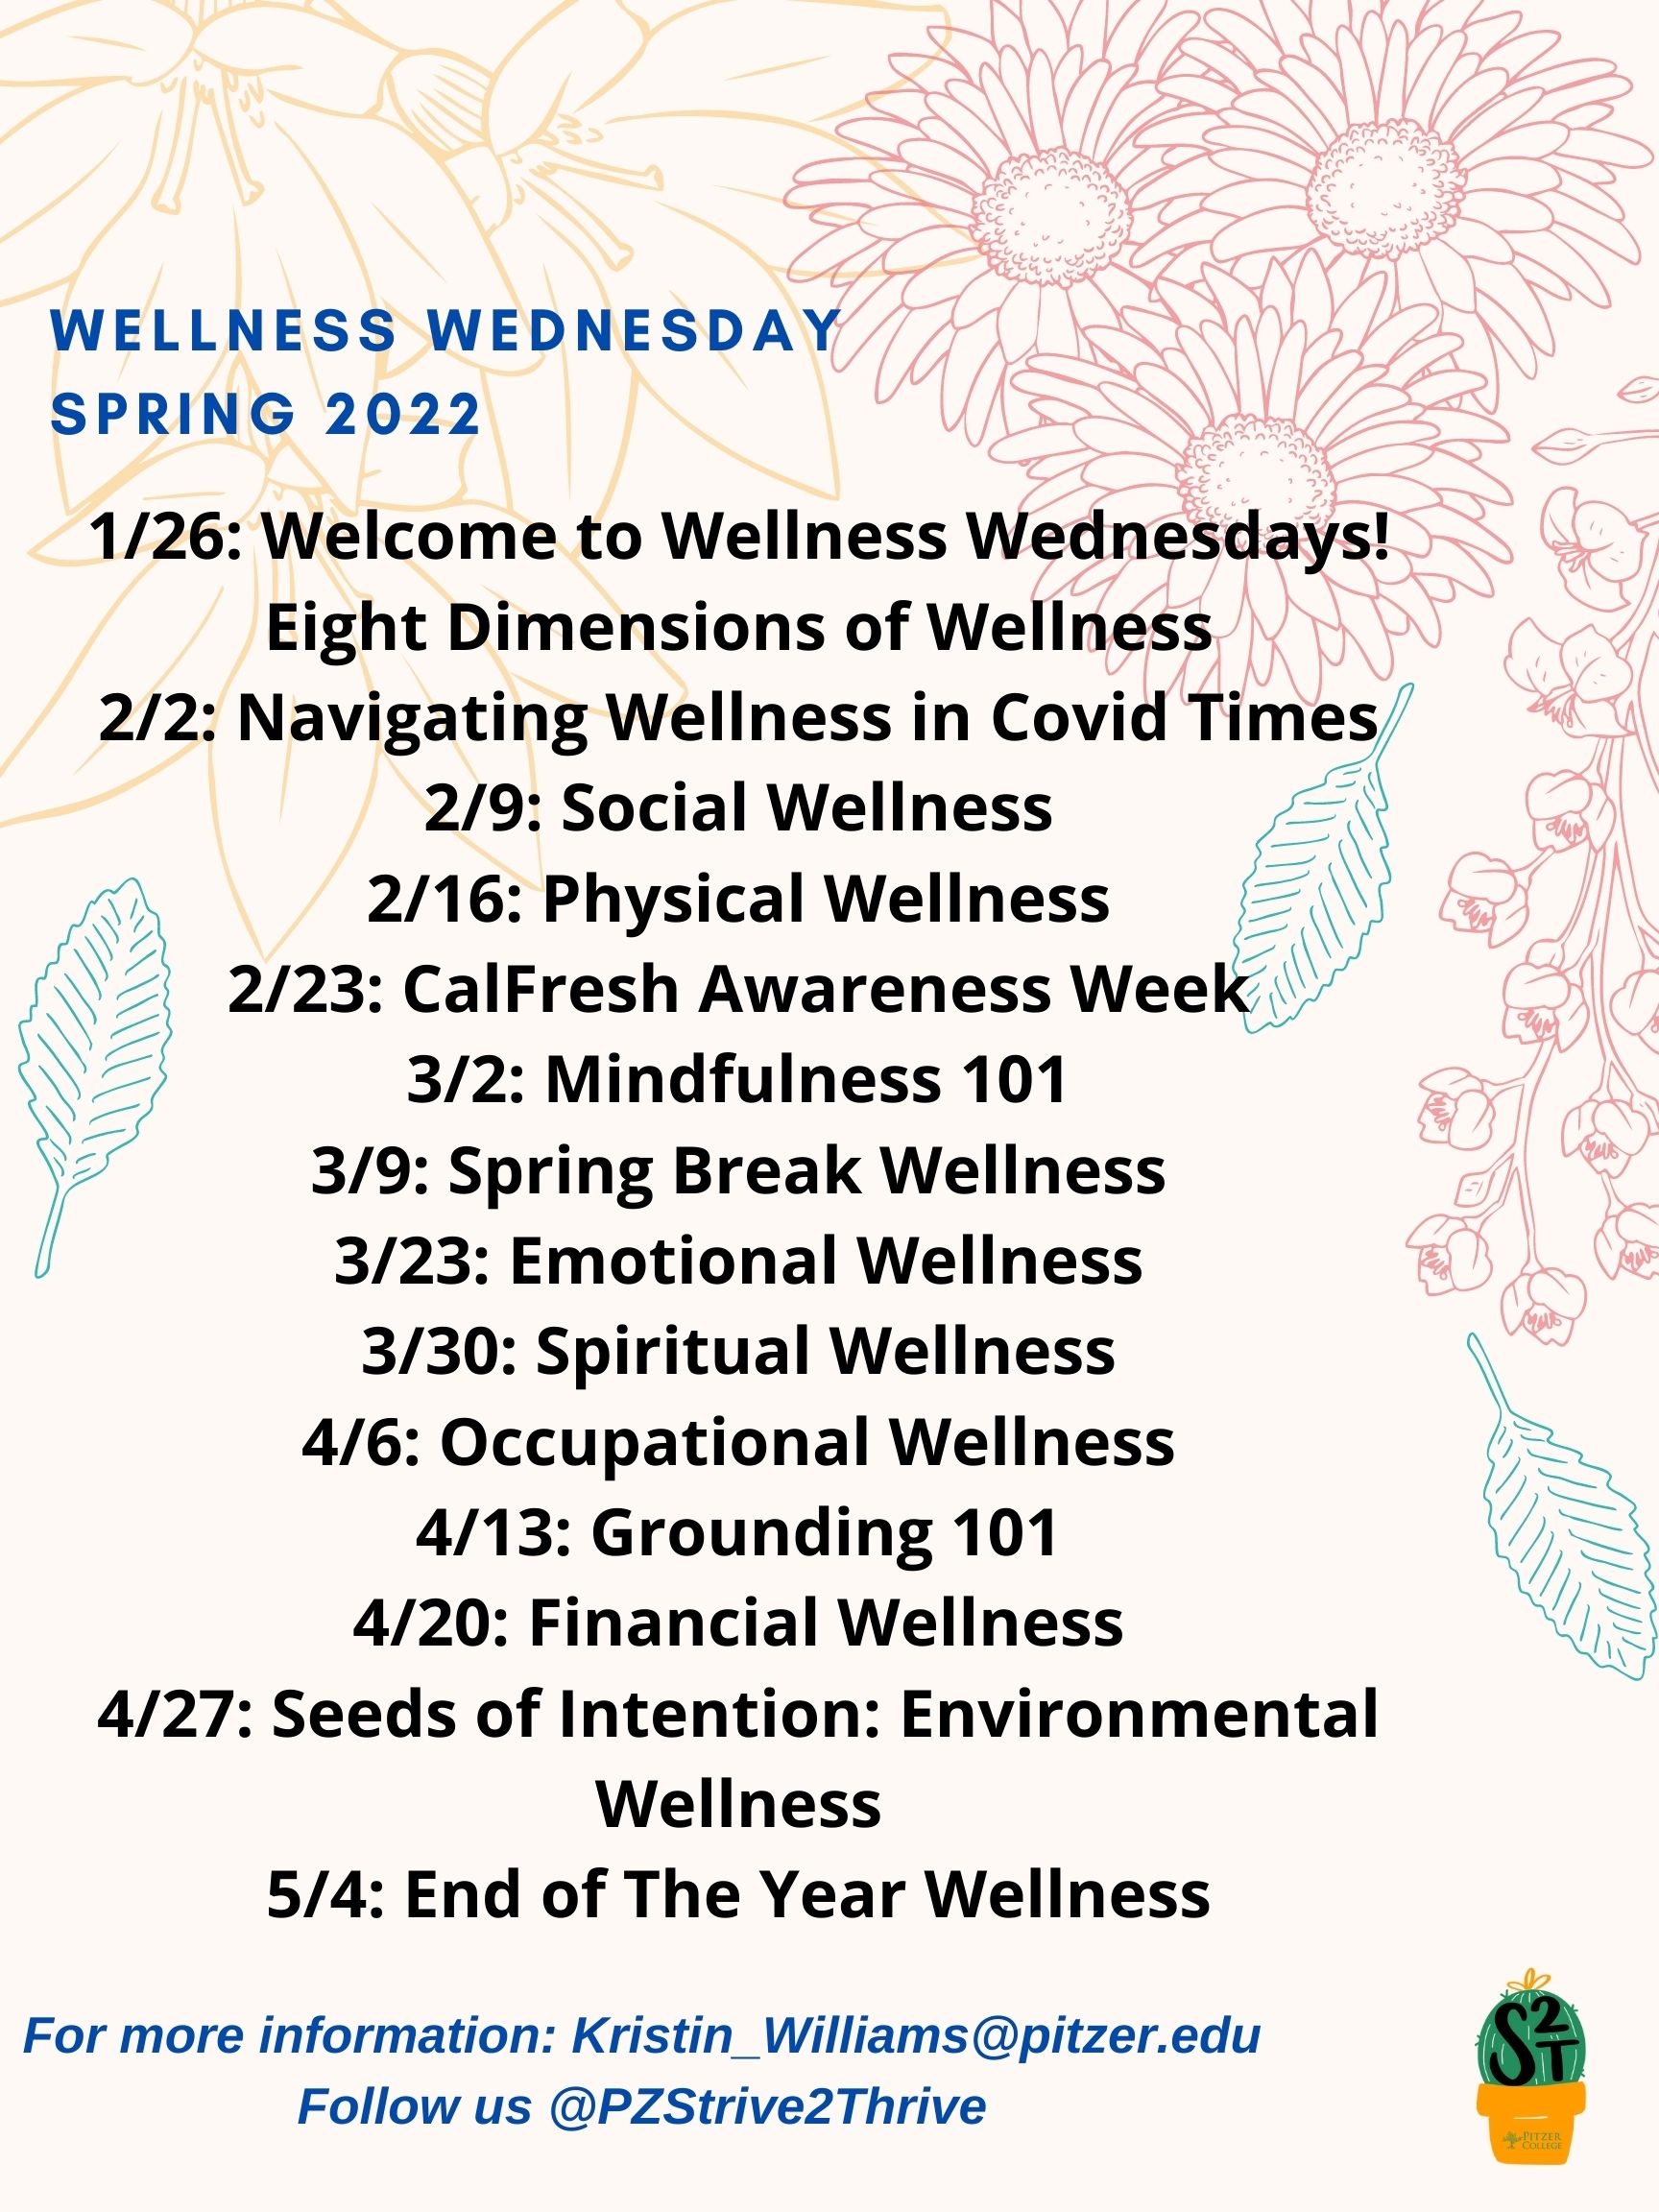 Pitzer College Calendar 2022 Wellness Wednesday: Welcome To Spring 2022! - Pitzer College